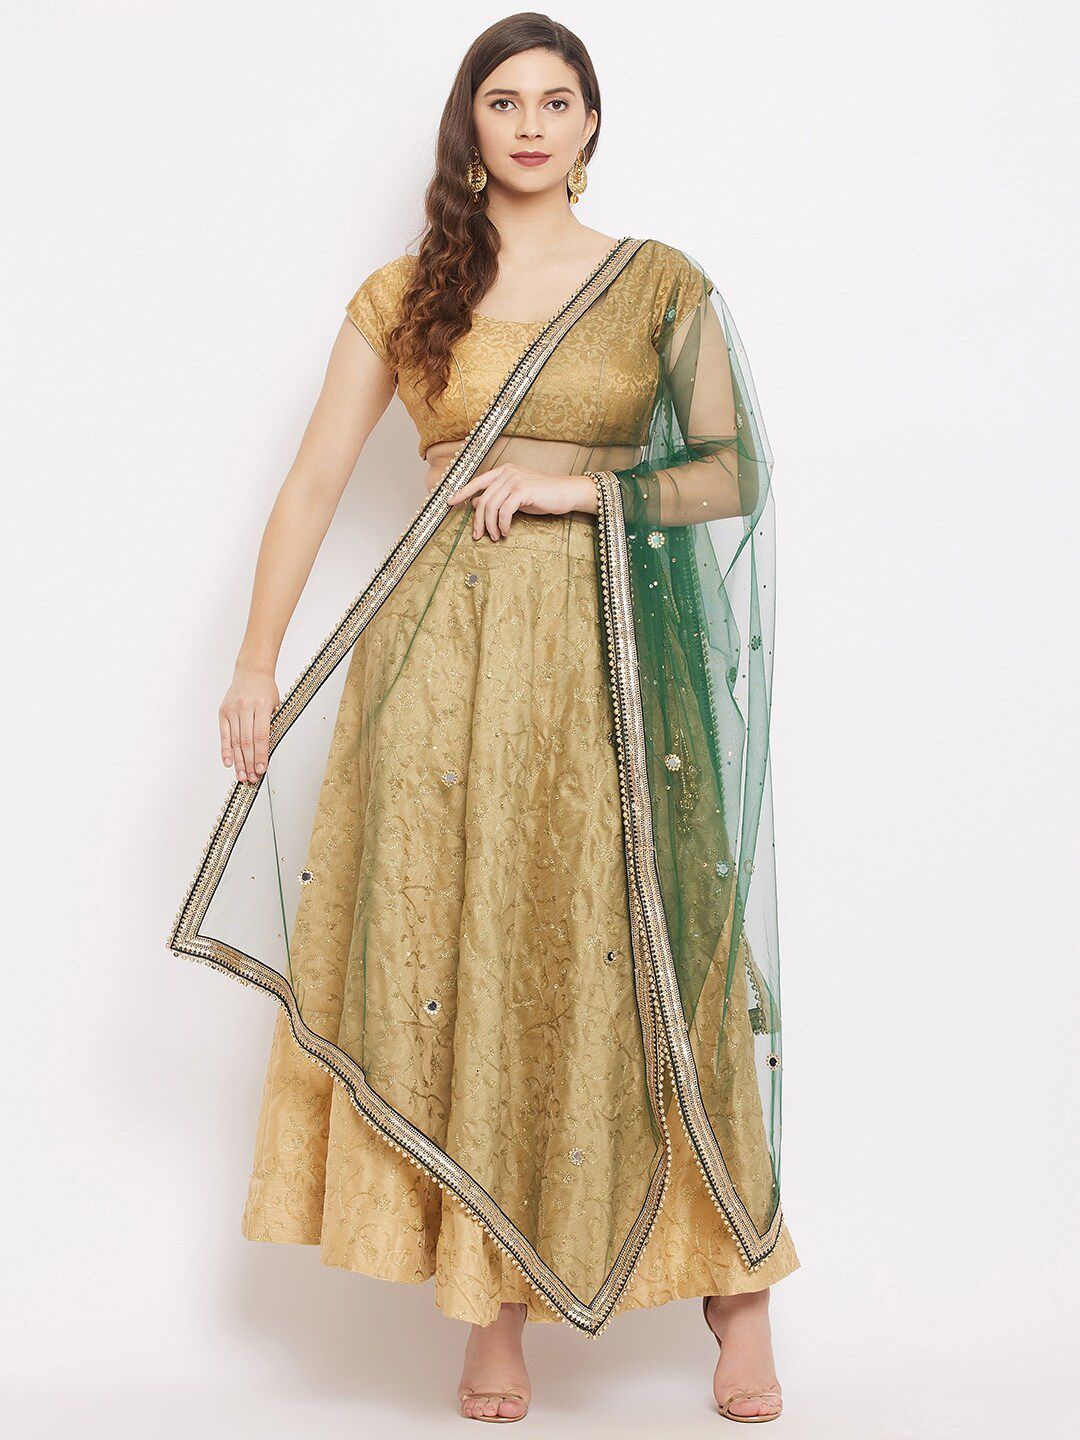 Clora Creation Green & Silver-Toned Ethnic Motifs Embroidered Dupatta with Beads and Stones Price in India